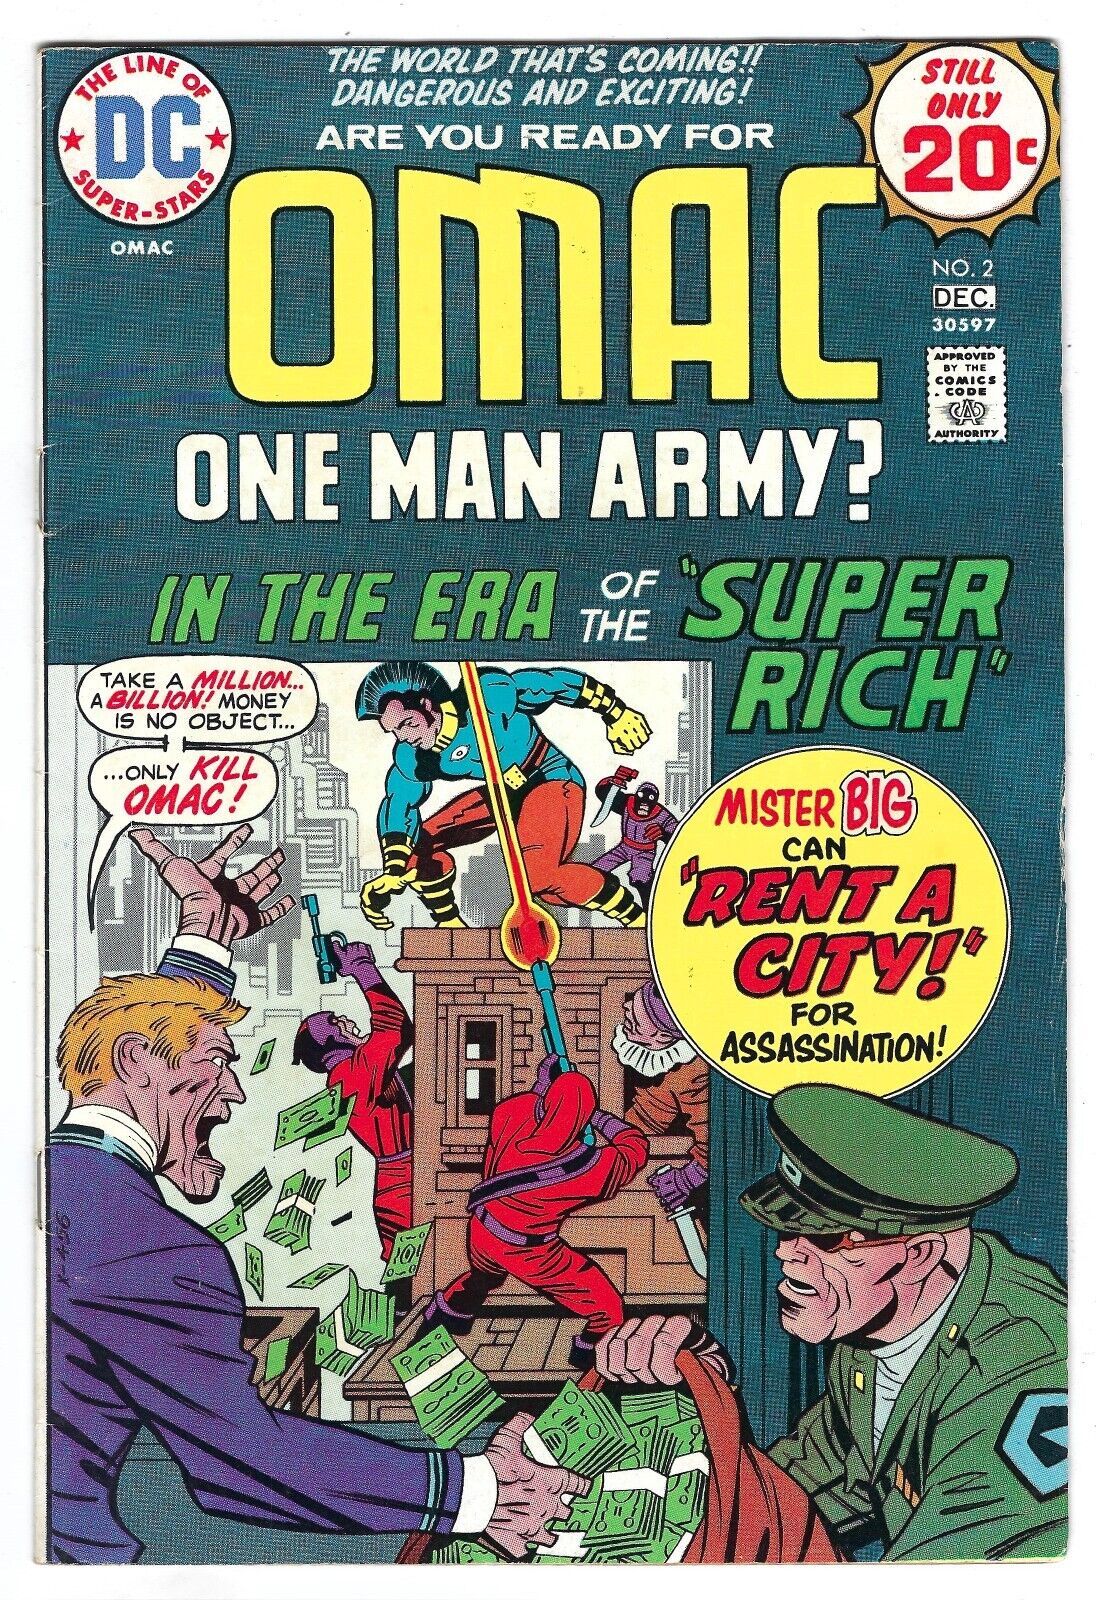 OMAC #2 - Mister Big can Rent A City for Assassination